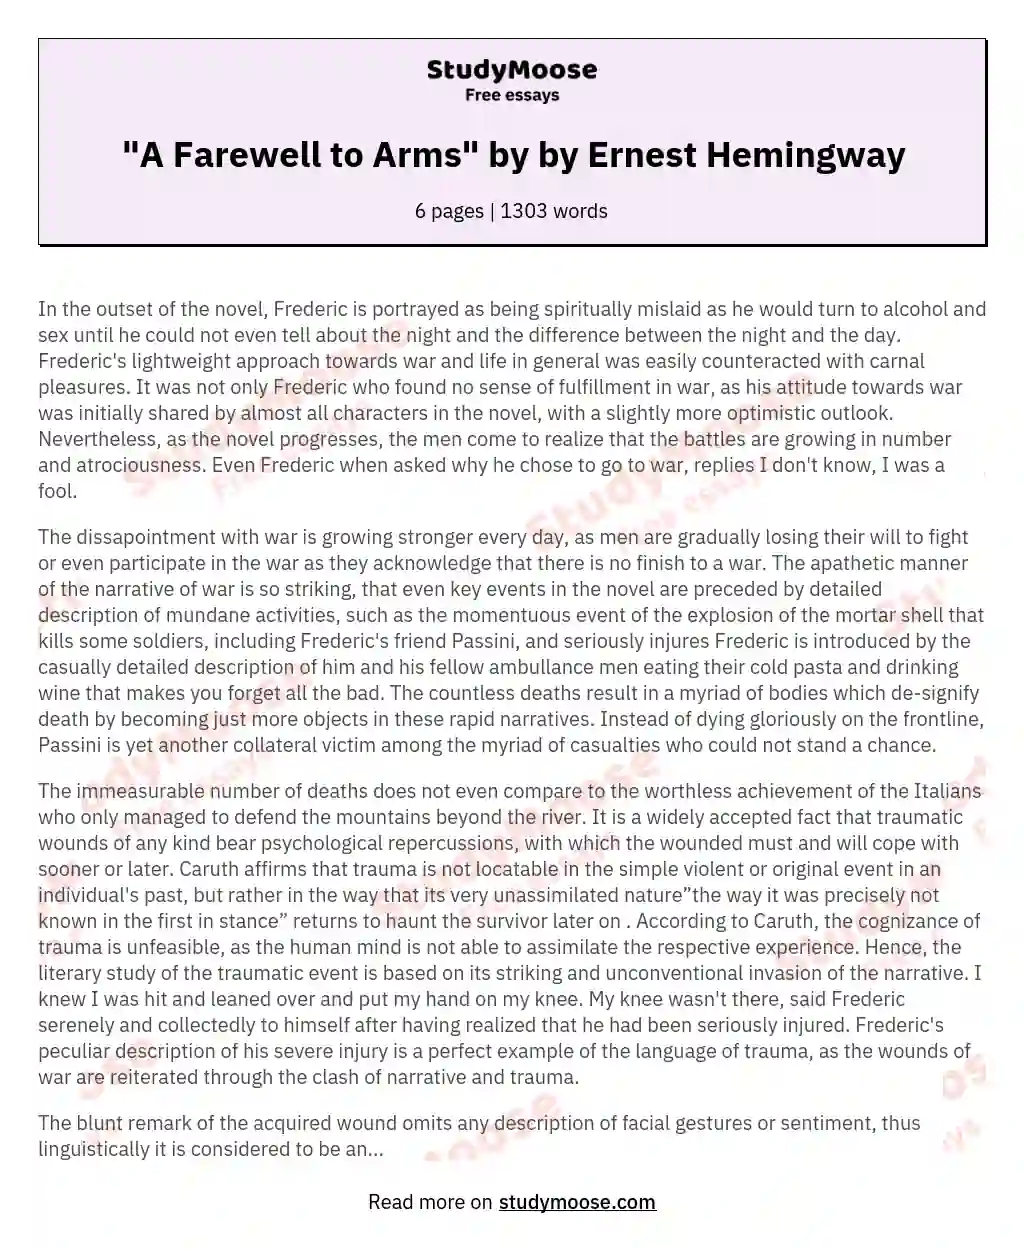 "A Farewell to Arms" by by Ernest Hemingway